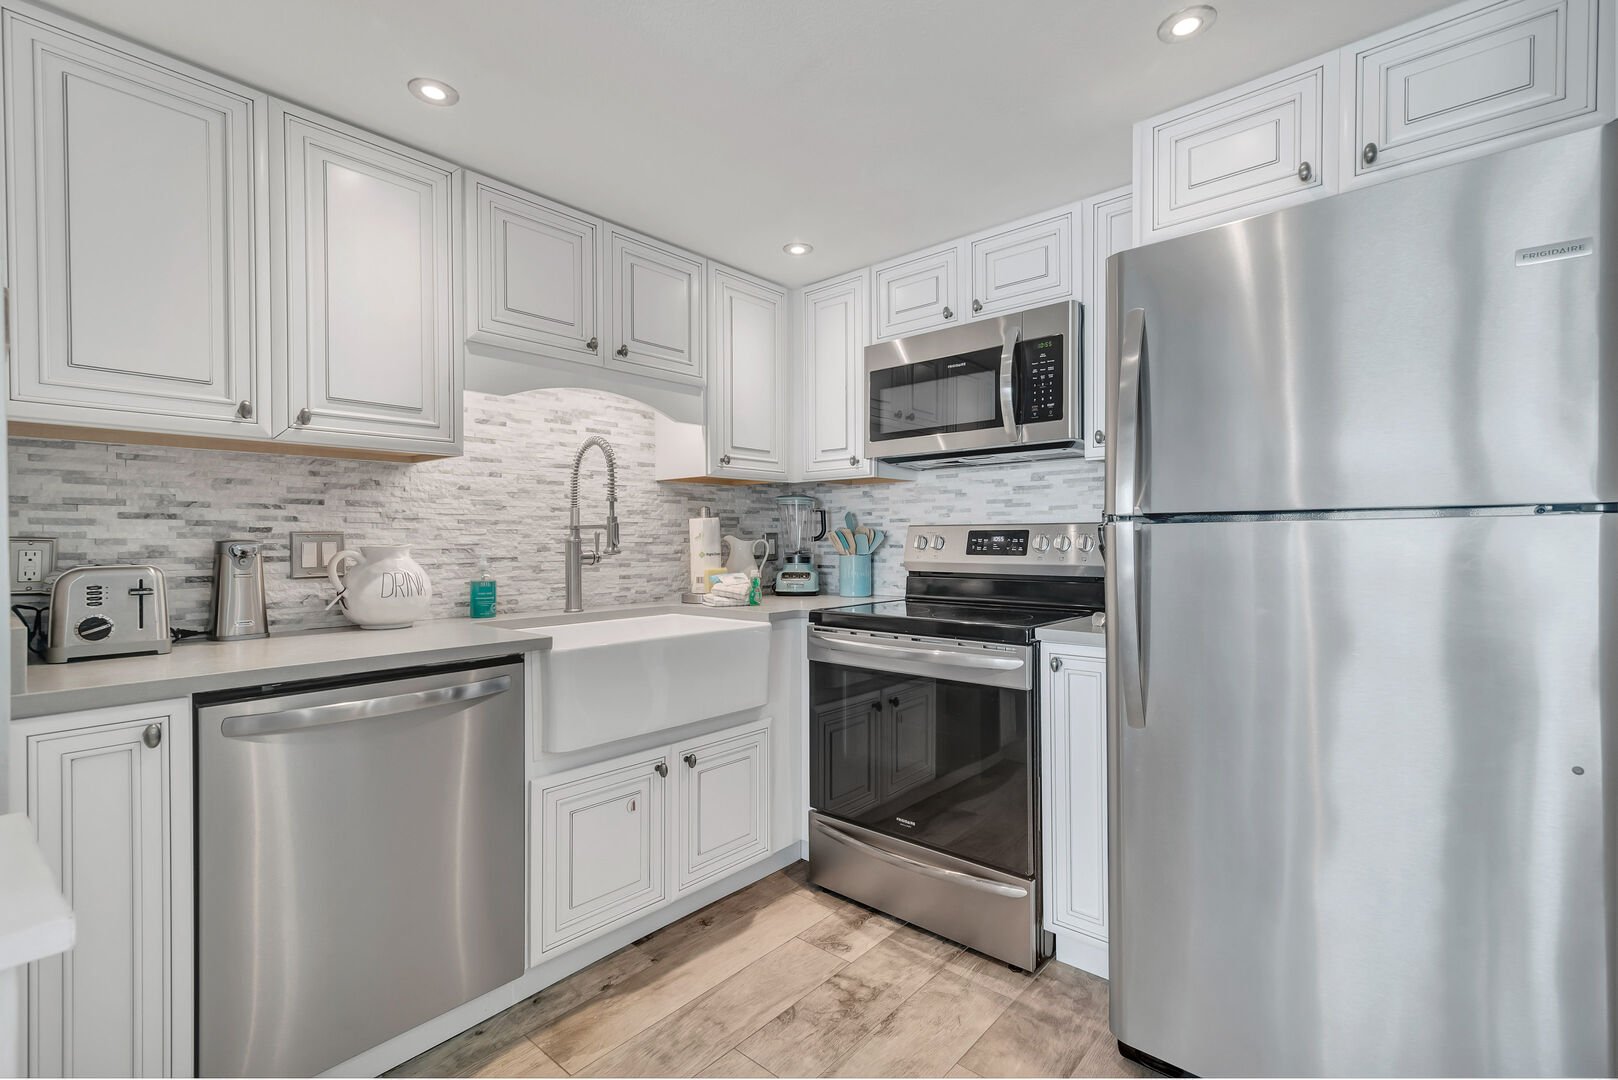 Fully Equipped Upgraded Kitchen with Quartz Countertops and Stainless Steel Appliances